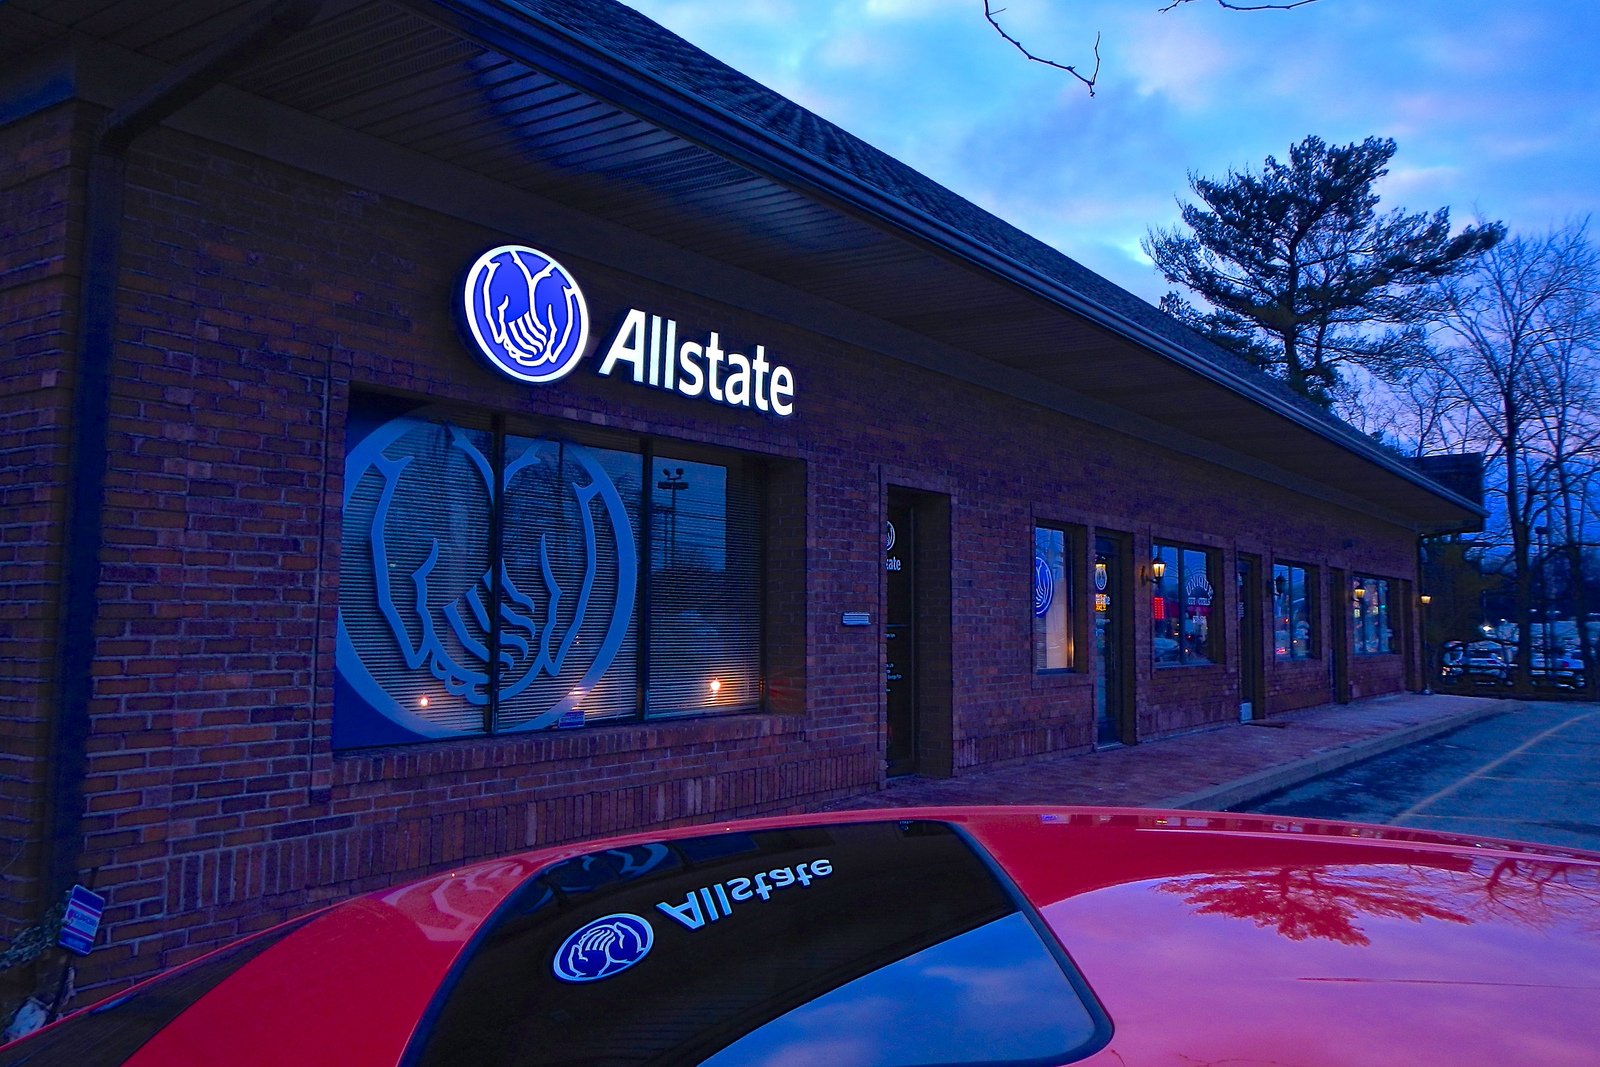 What are my Allstate car insurance options?